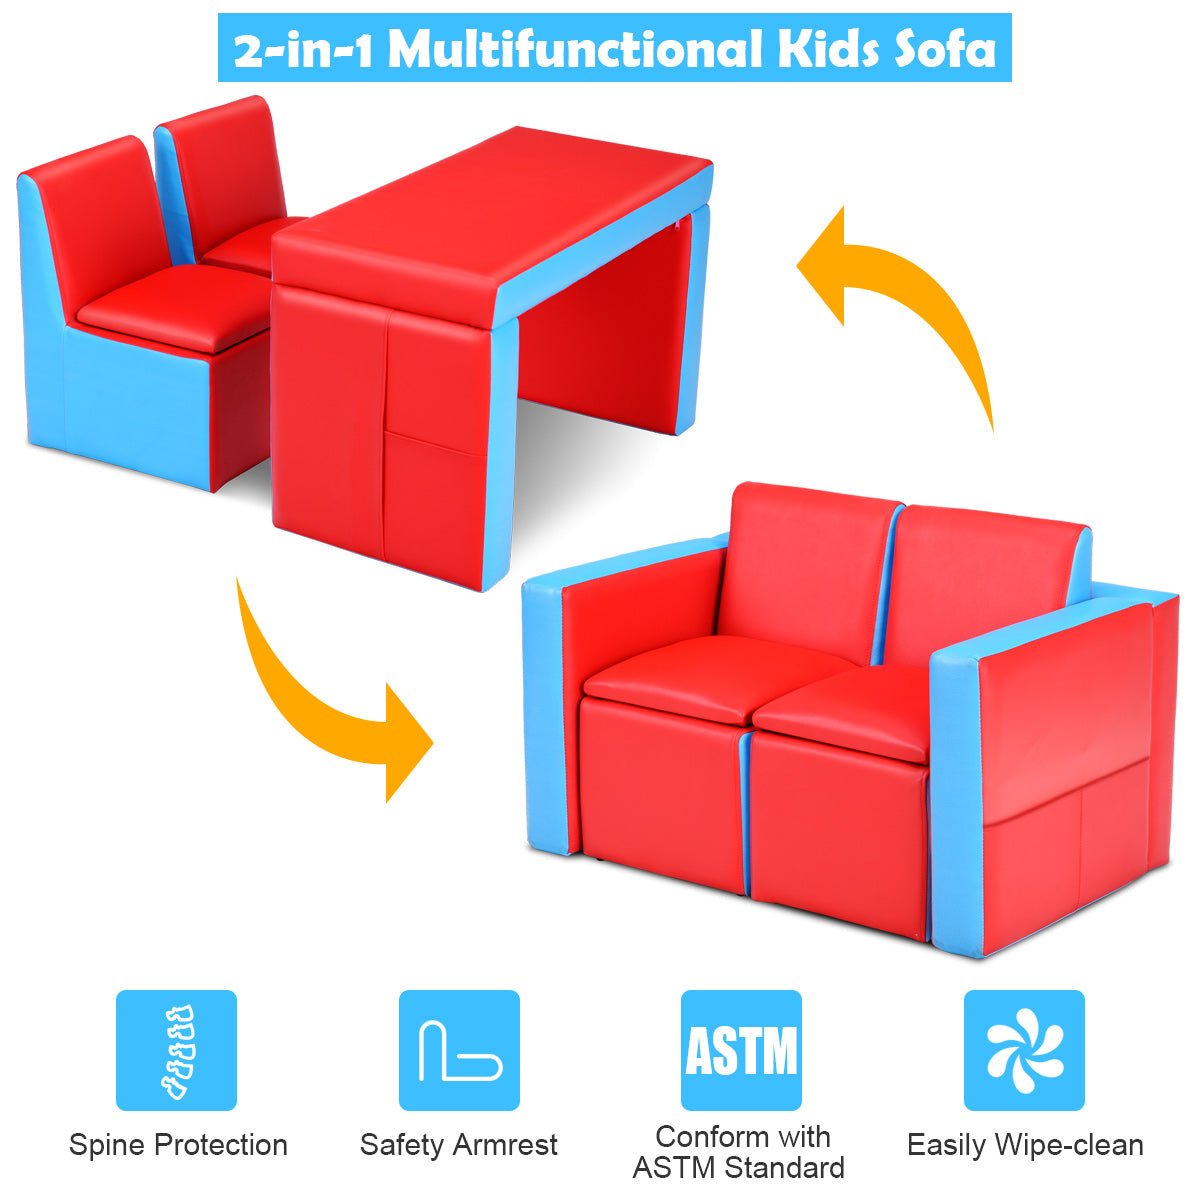 2-in-1 Kids Sofa with Storage - Comfortable Seating and Neat Arrangement